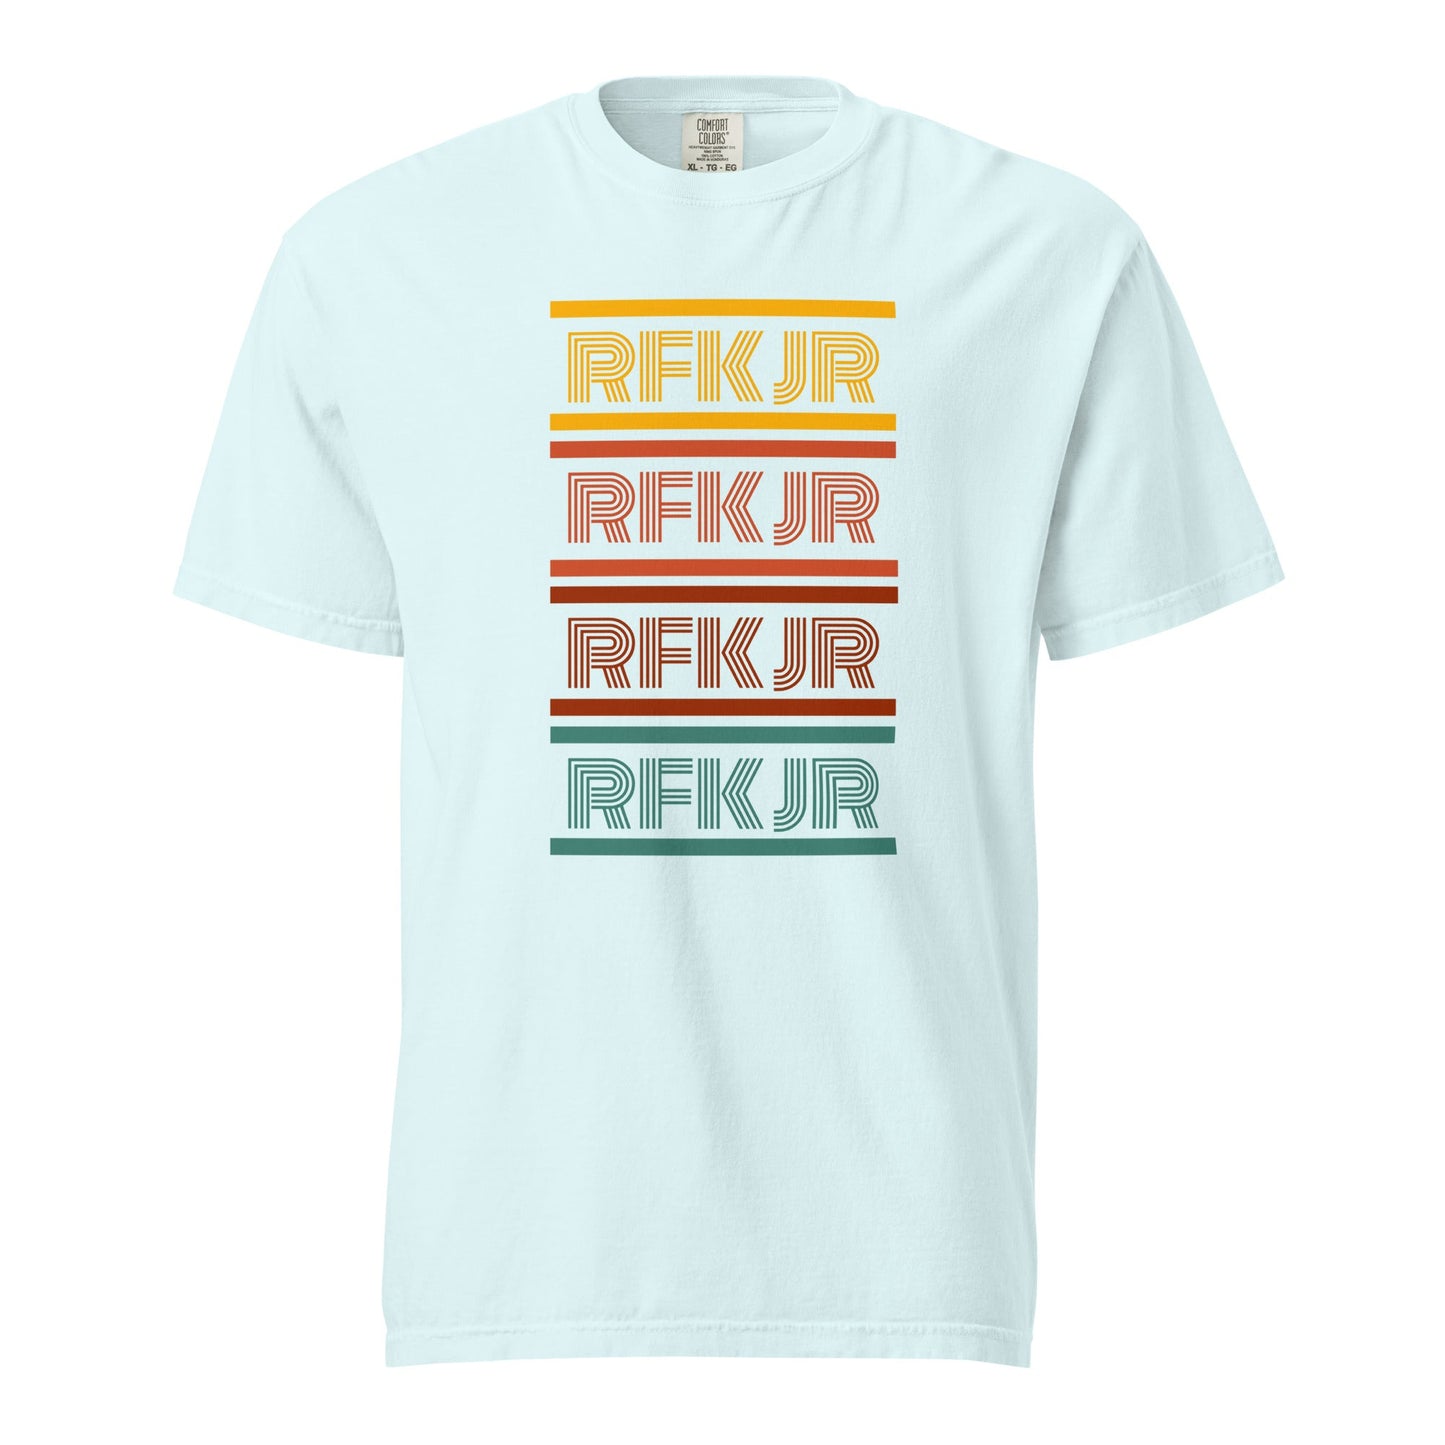 RFK JR. 70's Heavyweight Unisex Tee - TEAM KENNEDY. All rights reserved